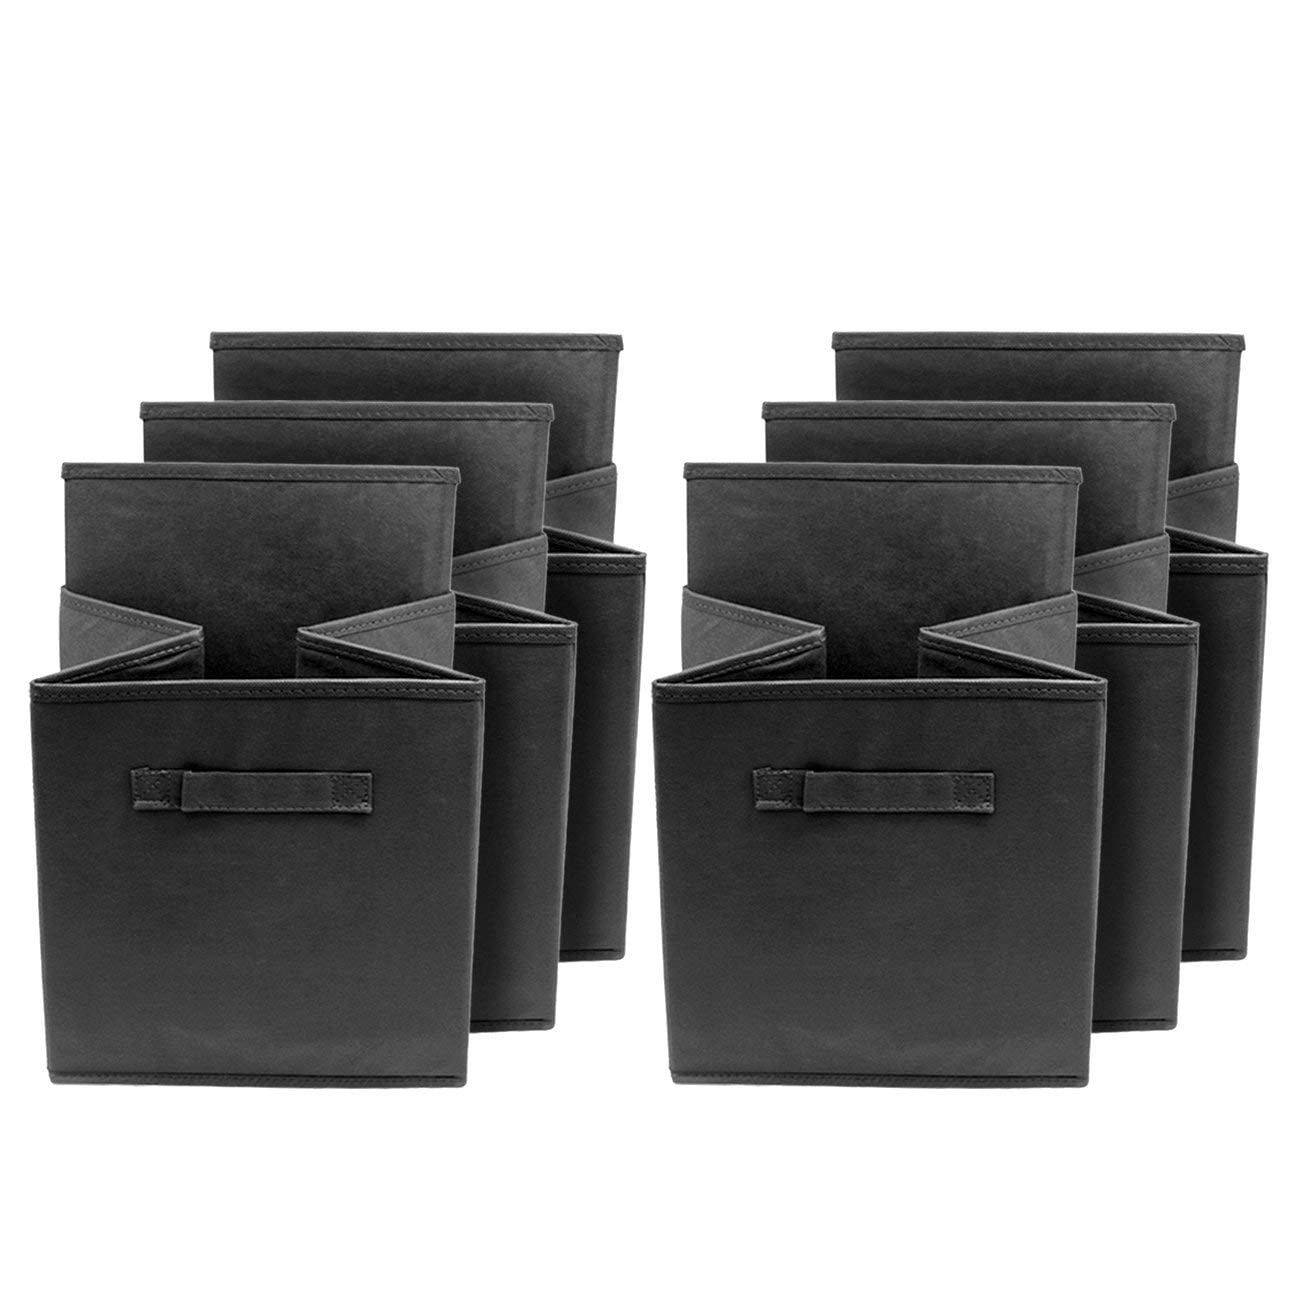 VGEBY Set of 6 Foldable Fabric Storage Cube Bins Collapsible Cloth